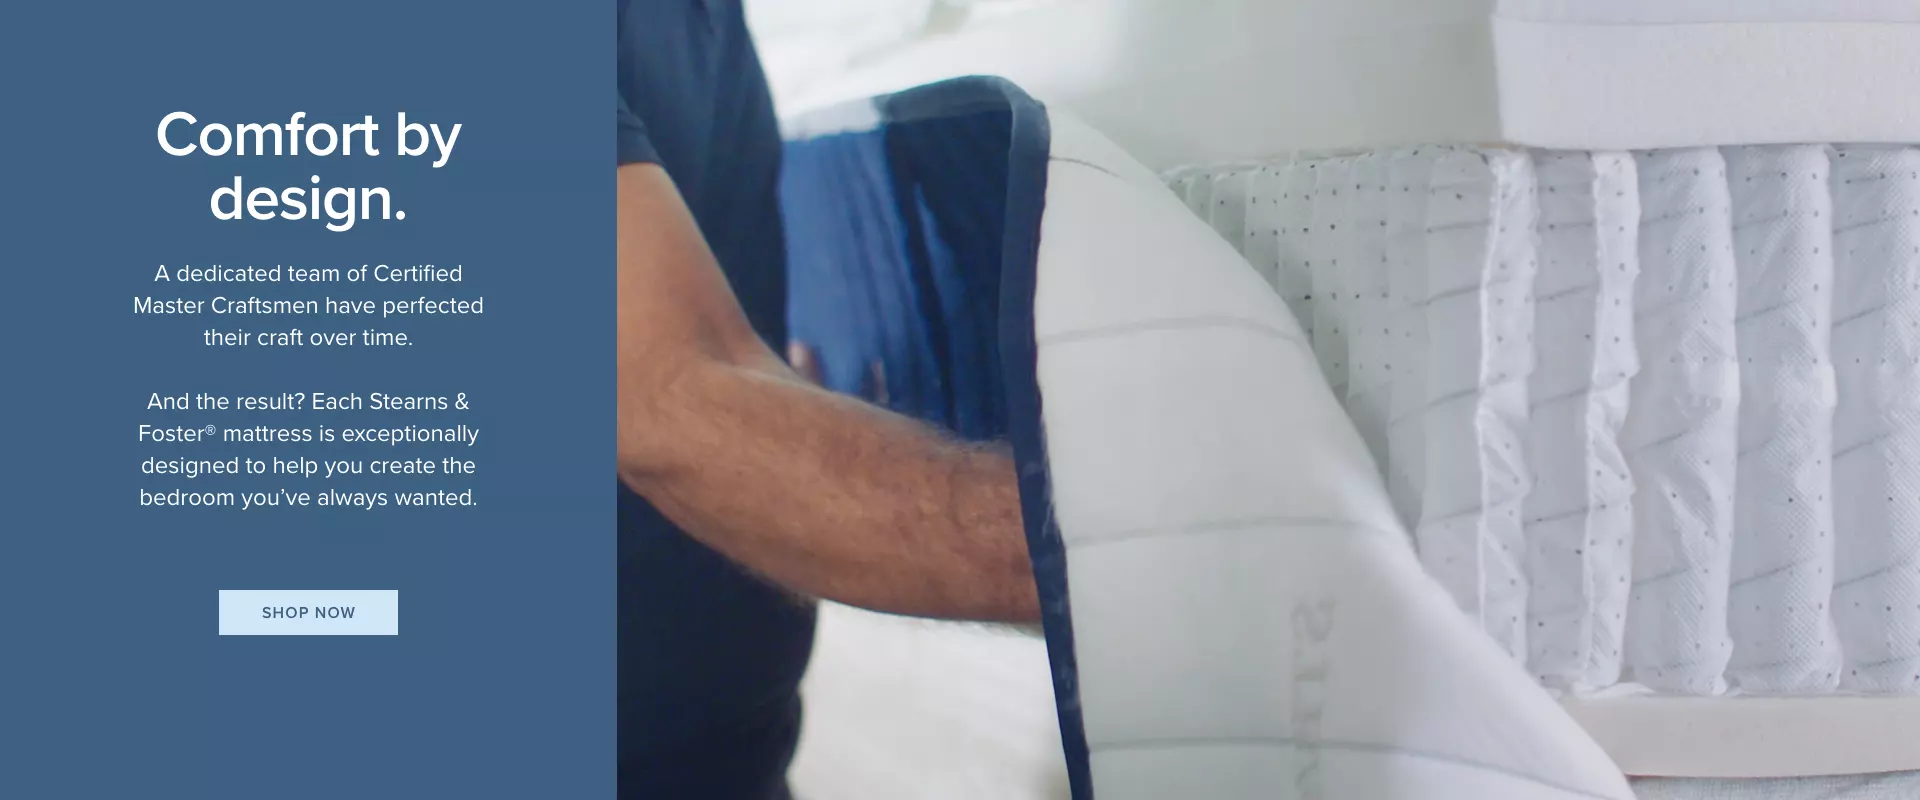 Stearns and Foster Mattresses - Comfort by design. A dedicated team of Certified Master Craftsmen have perfected their craft over time. And the result? Each Stearns & Foster mattress is exceptionally designed to help you create the bedroom you’ve always wanted.  - Shop Now